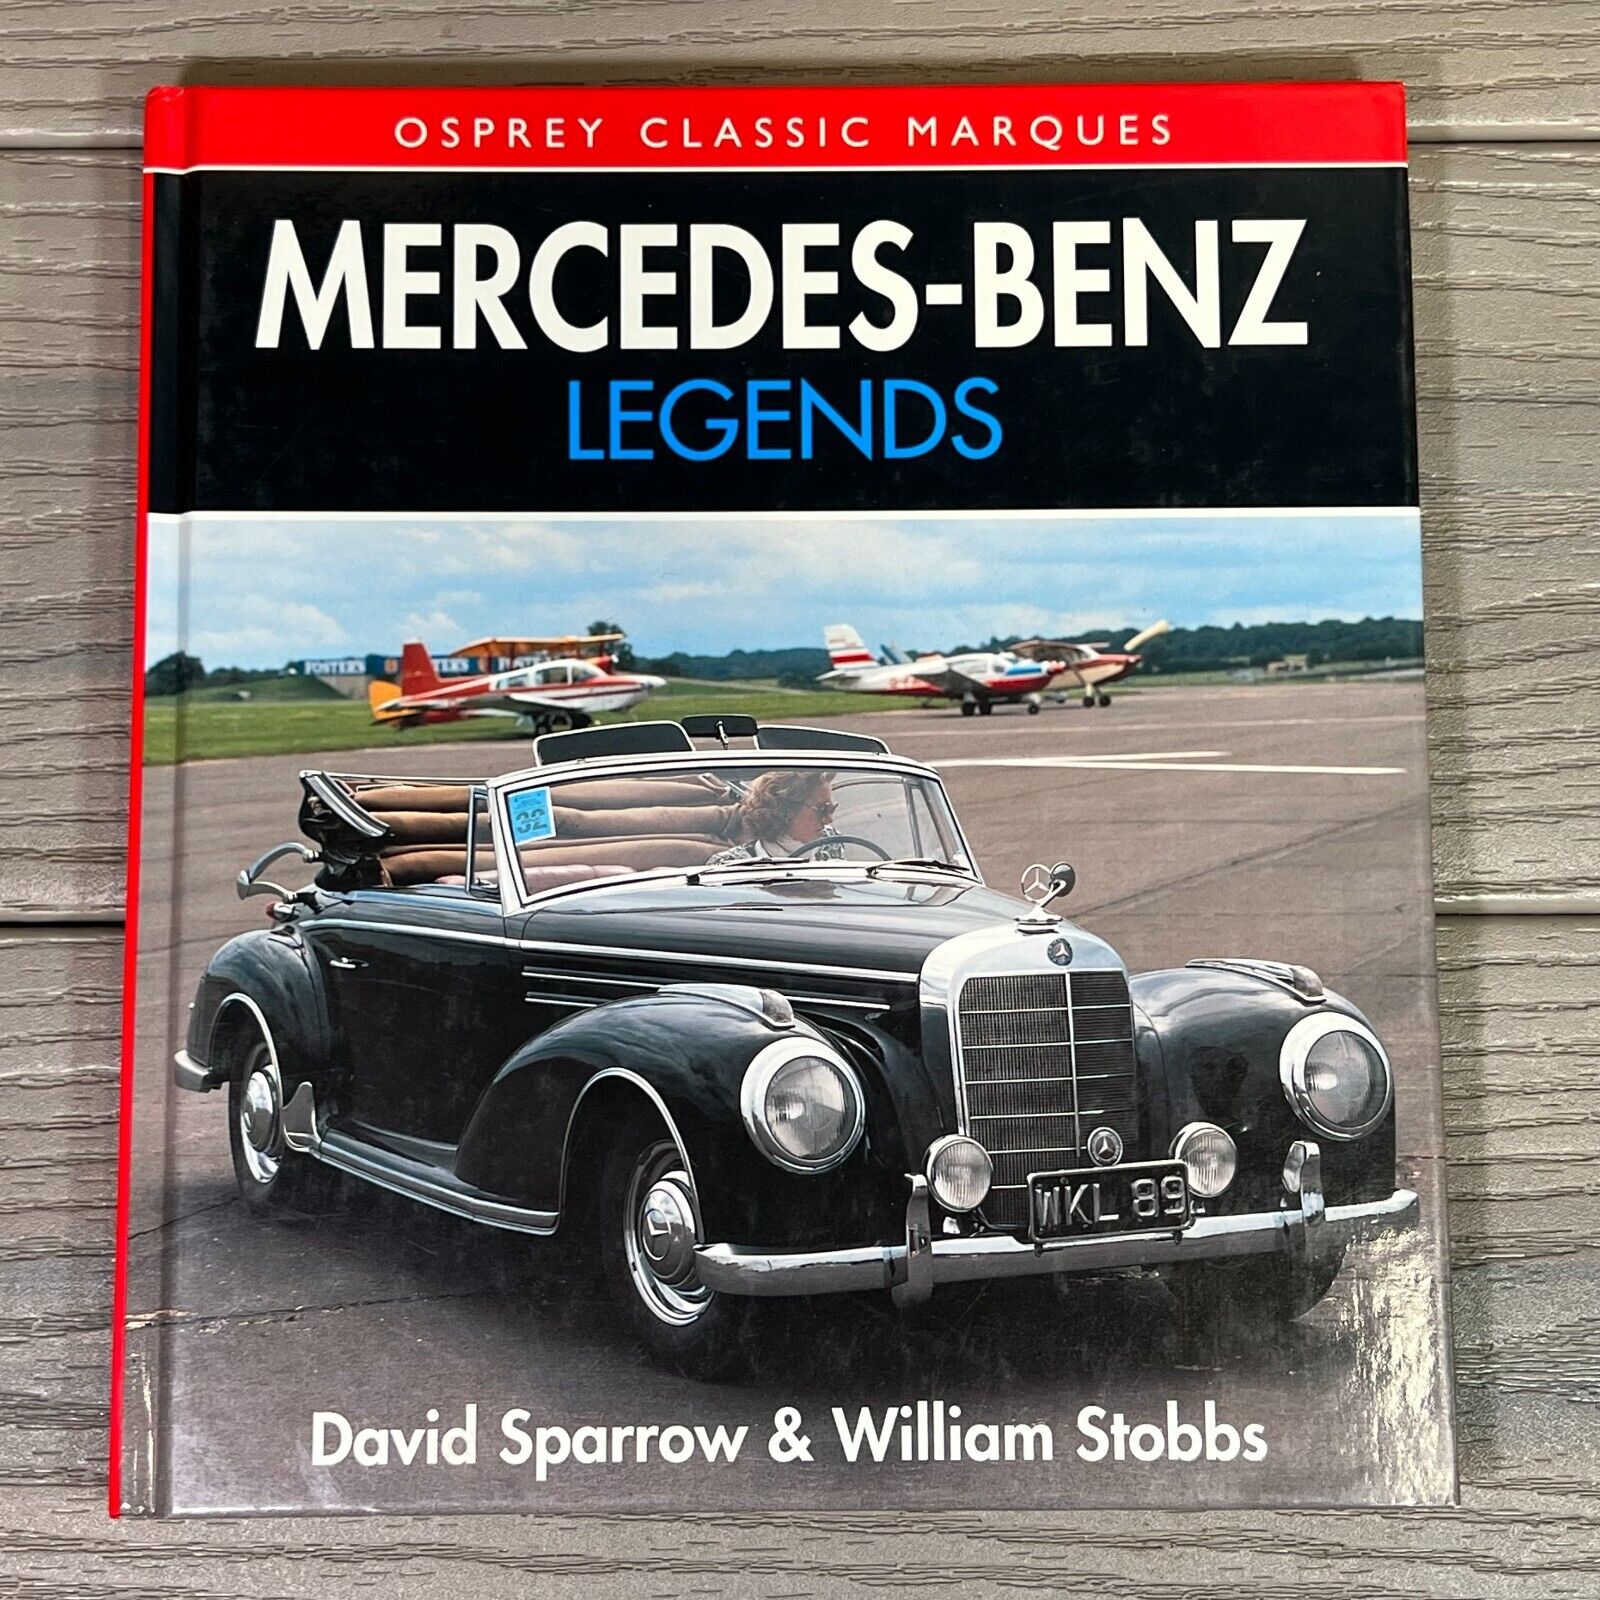 Mercedes-Benz: Legends by David Sparrow, Osprey Classic Marques VERY GOOD